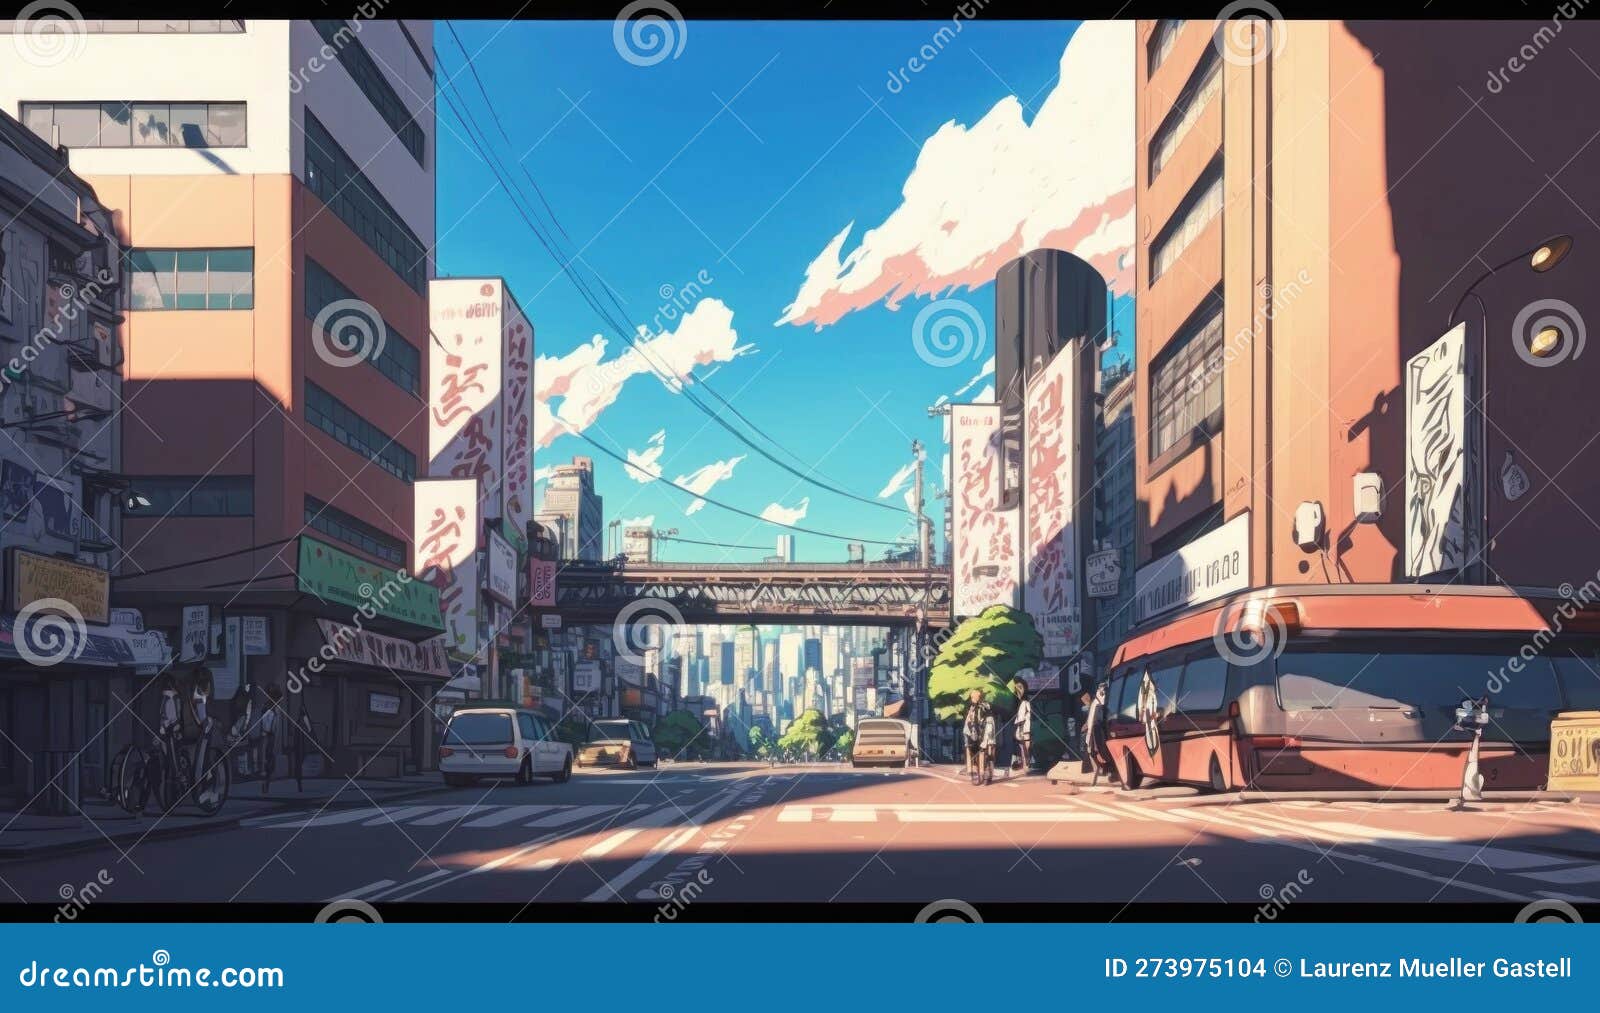 37+ Anime City Wallpapers for iPhone and Android by Heidi Simmons